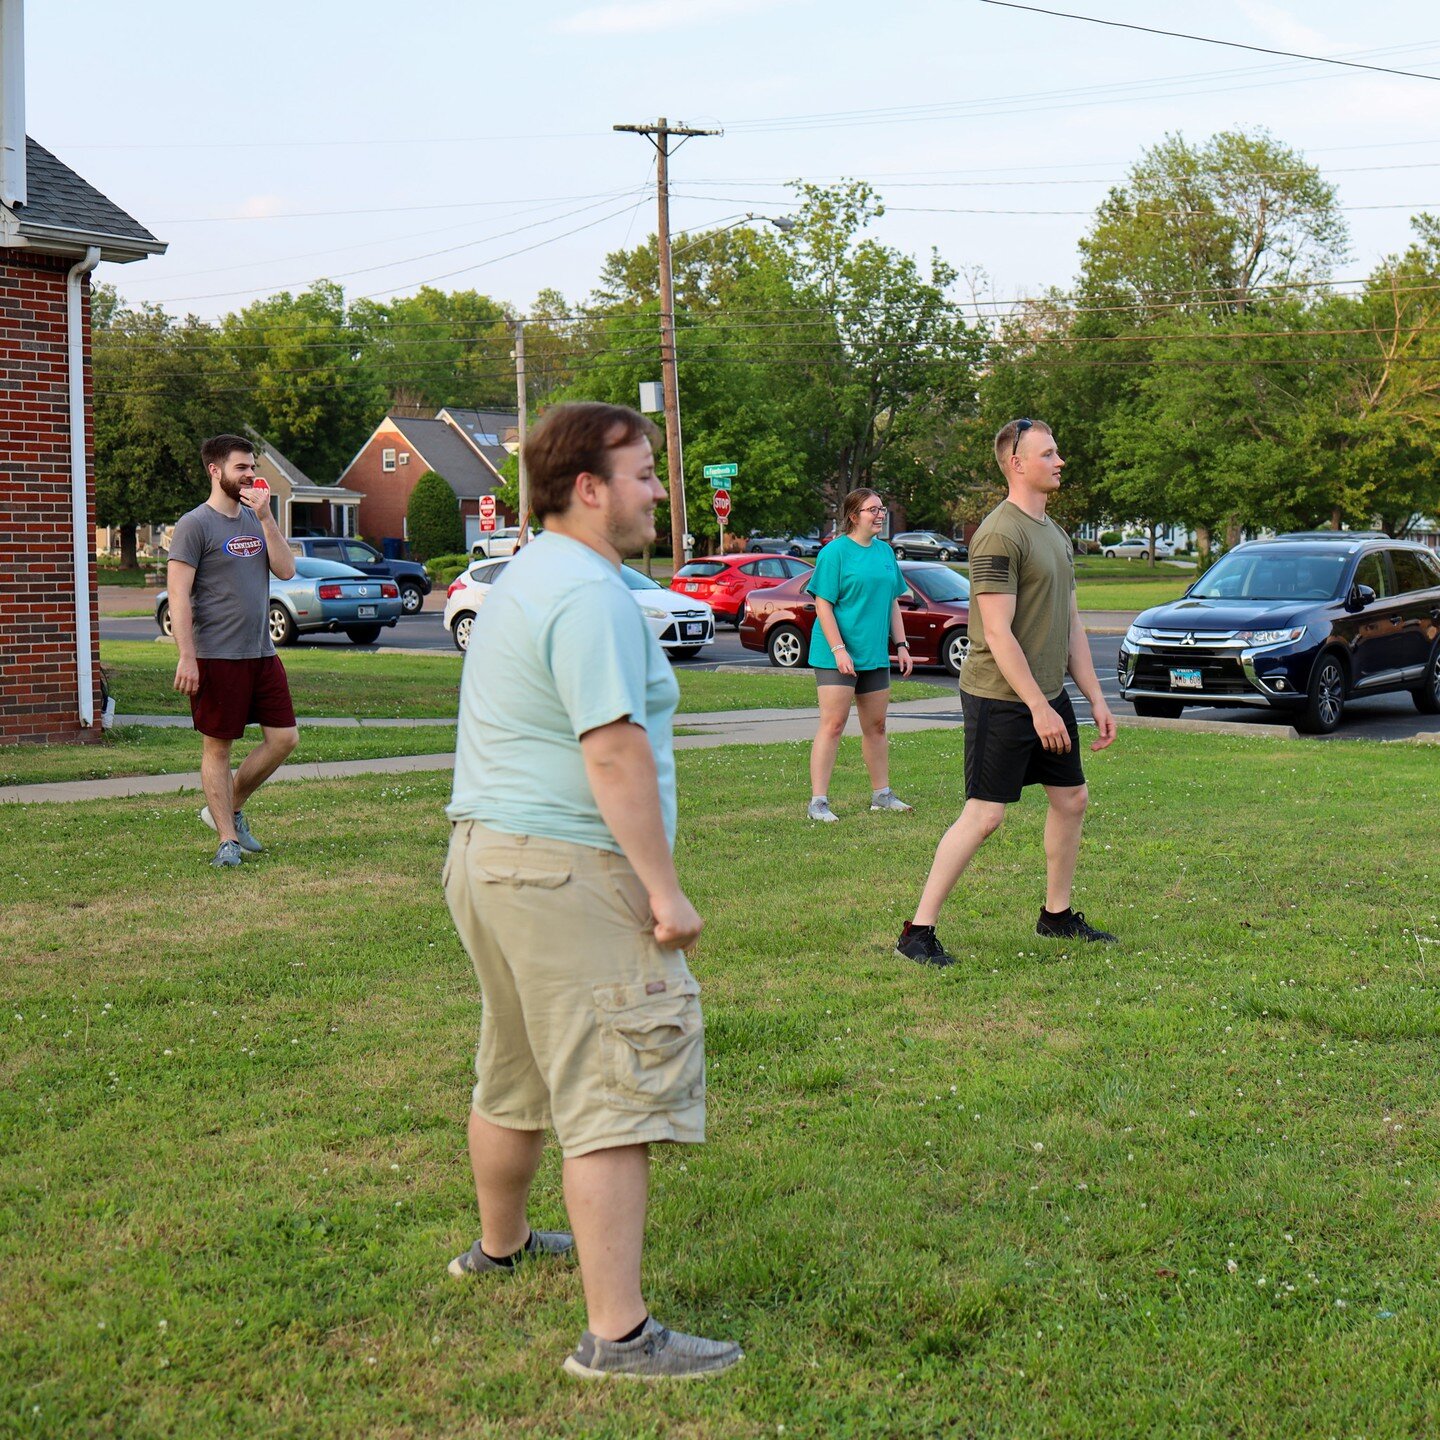 FUNARITY!
- 
Fun + Hilarity = Funarity
-
Lots more of it to be had tonight! Hope to see you at 6p for Mister B's wings and Matt B's pizza. Then, lots of amazing video games, including a Nintendo 64.
-
#murraystate #campusministry #lovegodlovepeople